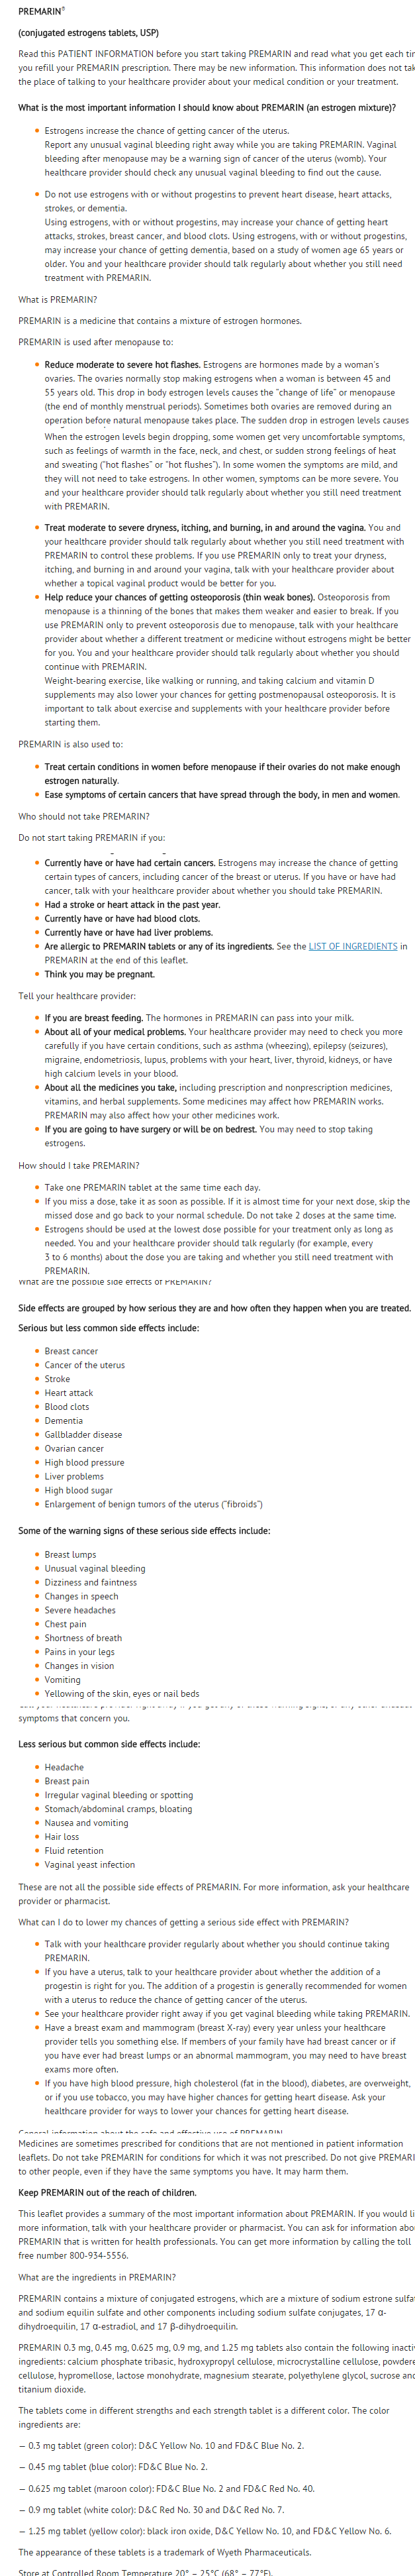 File:Premarin oral Patient counselling info.png